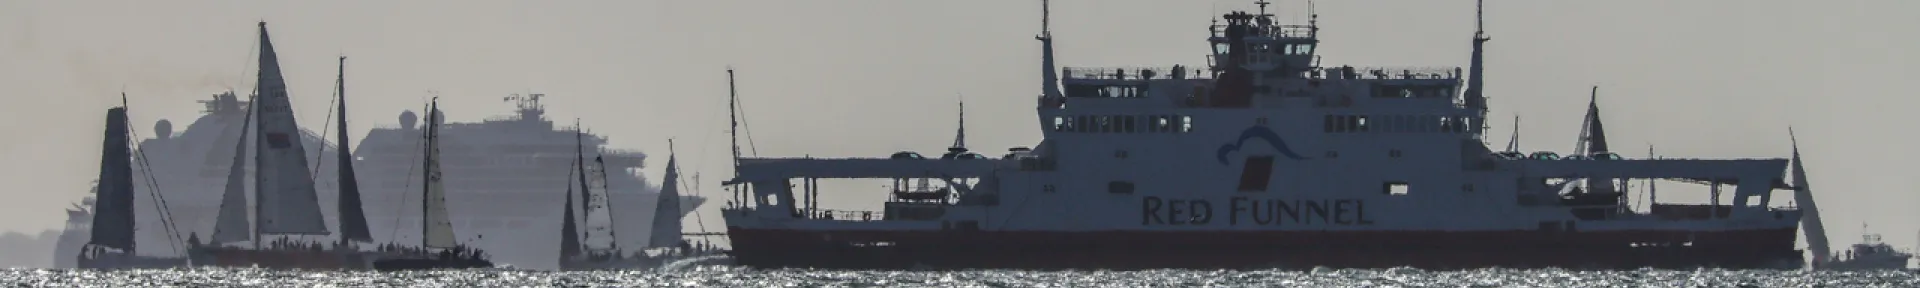 Solent with Red Funnel ferry